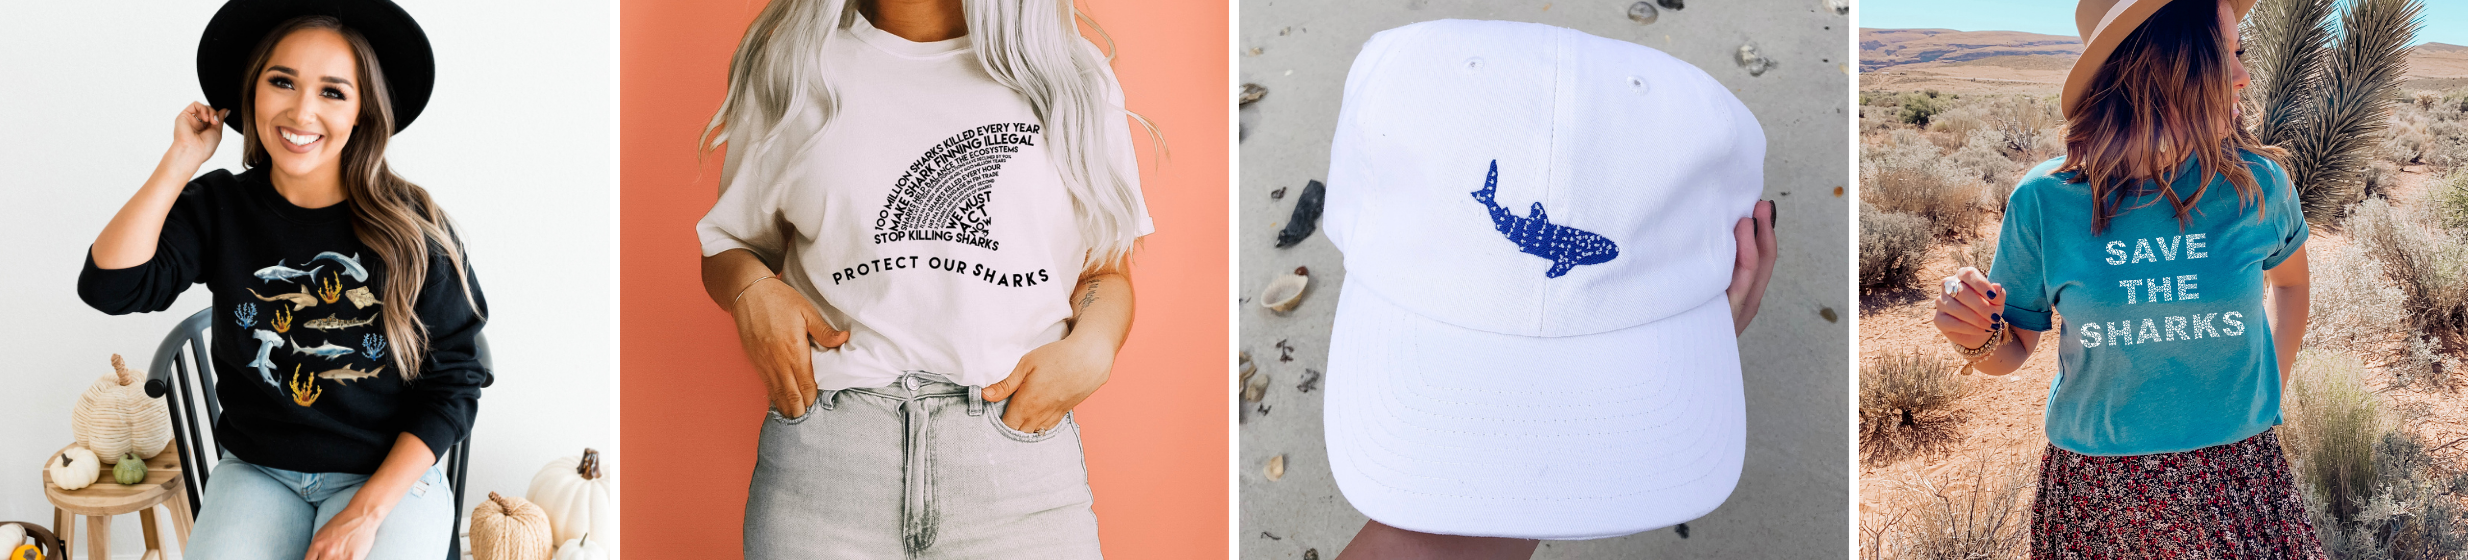 collage of sharonkornman products - woman wearing shirt with sharks, woman wearing shark fin tshirt, whale shark cotton cap, and save the sharks tshirt